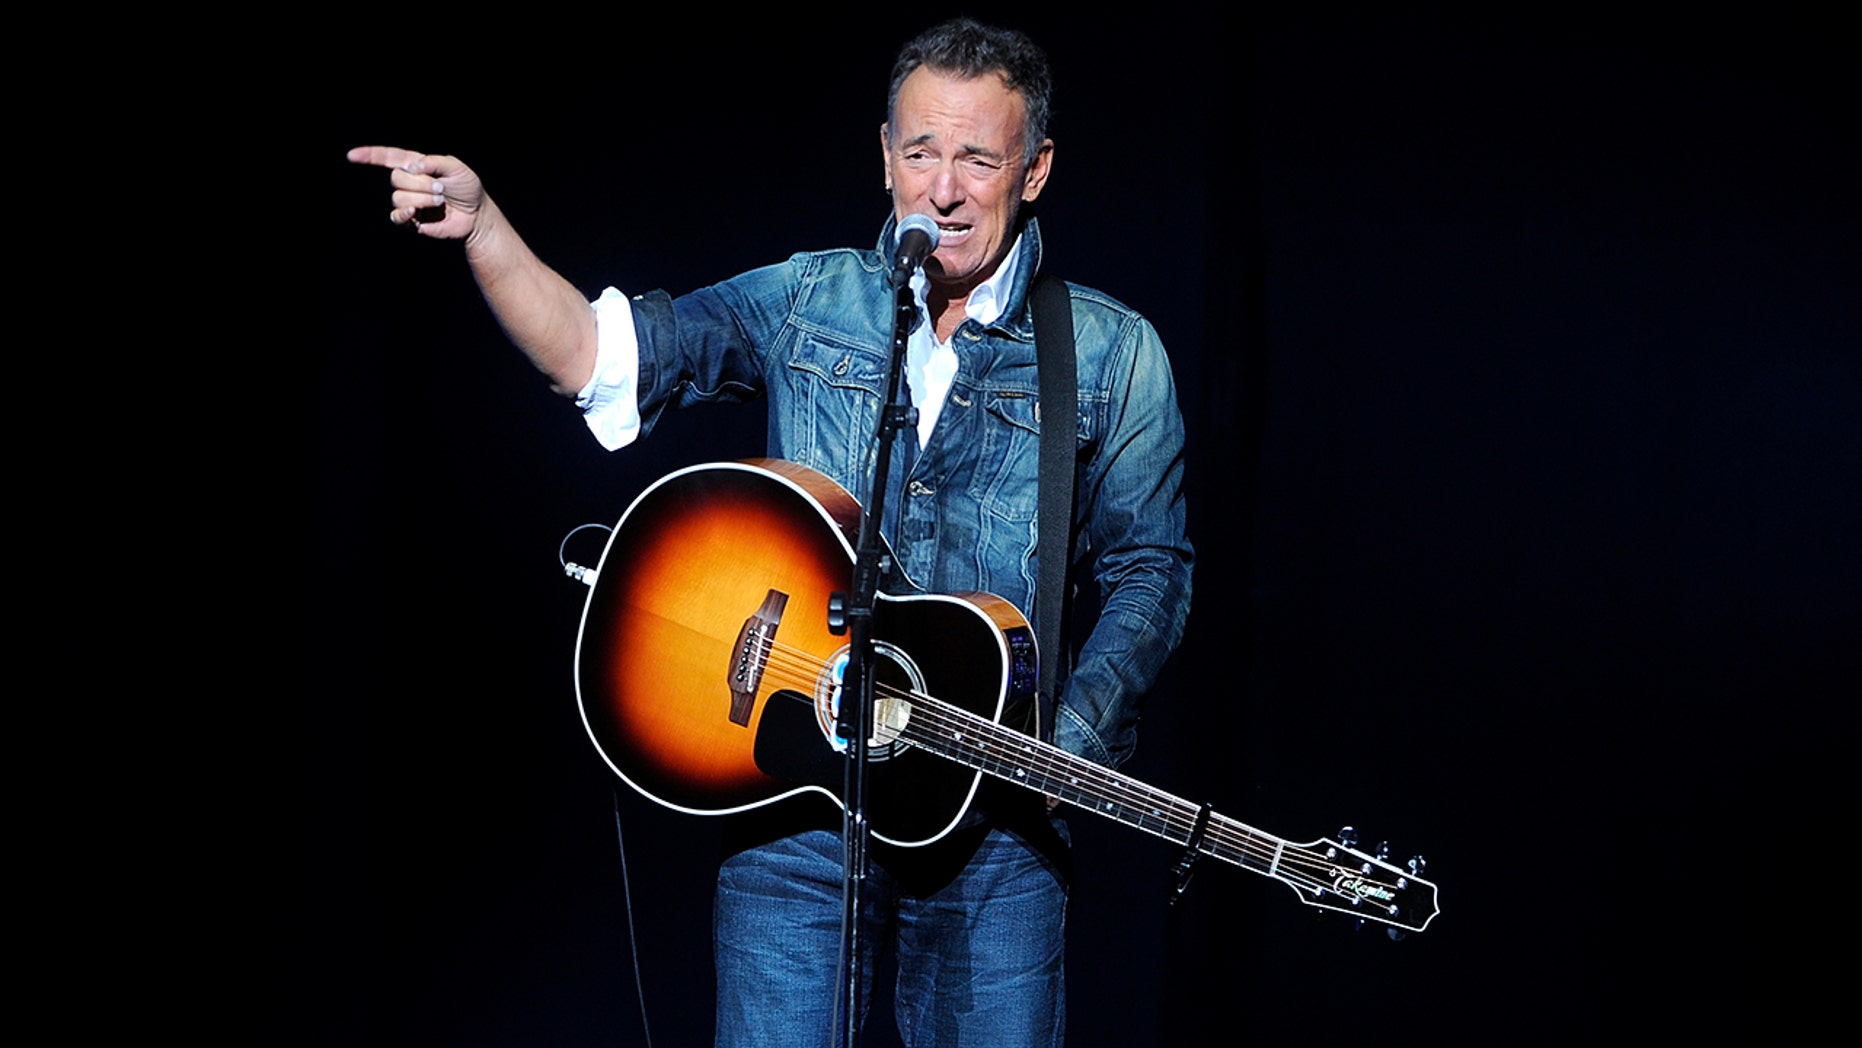 Bruce Springsteen performs at the 12th annual Stand Up For Heroes benefit concert at the Hulu Theater at Madison Square Garden on Monday, Nov. 5, 2018, in New York.